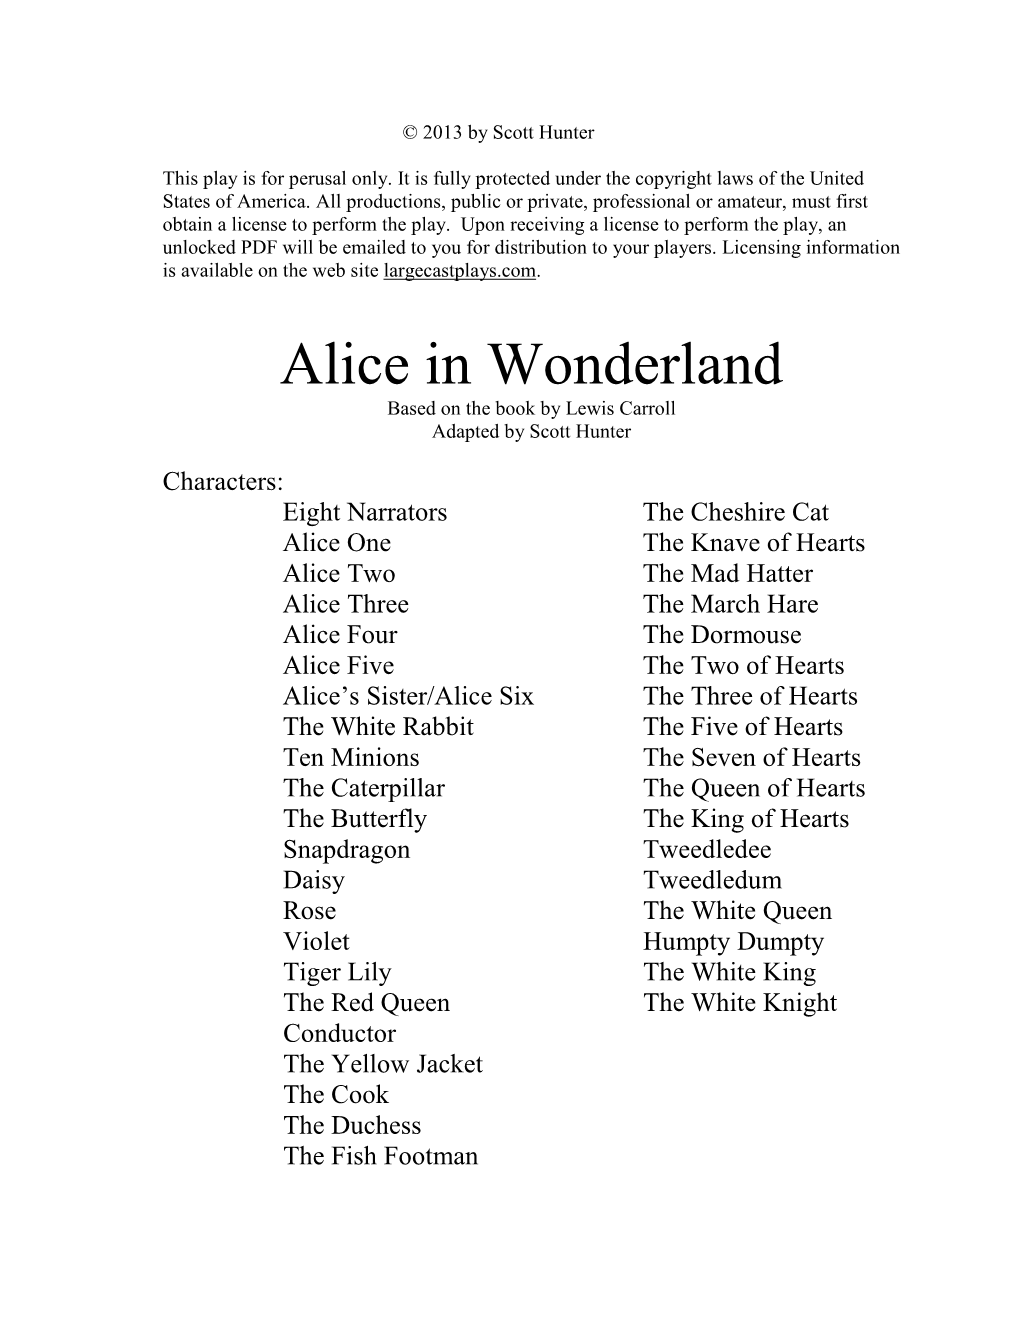 Alice in Wonderland Based on the Book by Lewis Carroll Adapted by Scott Hunter